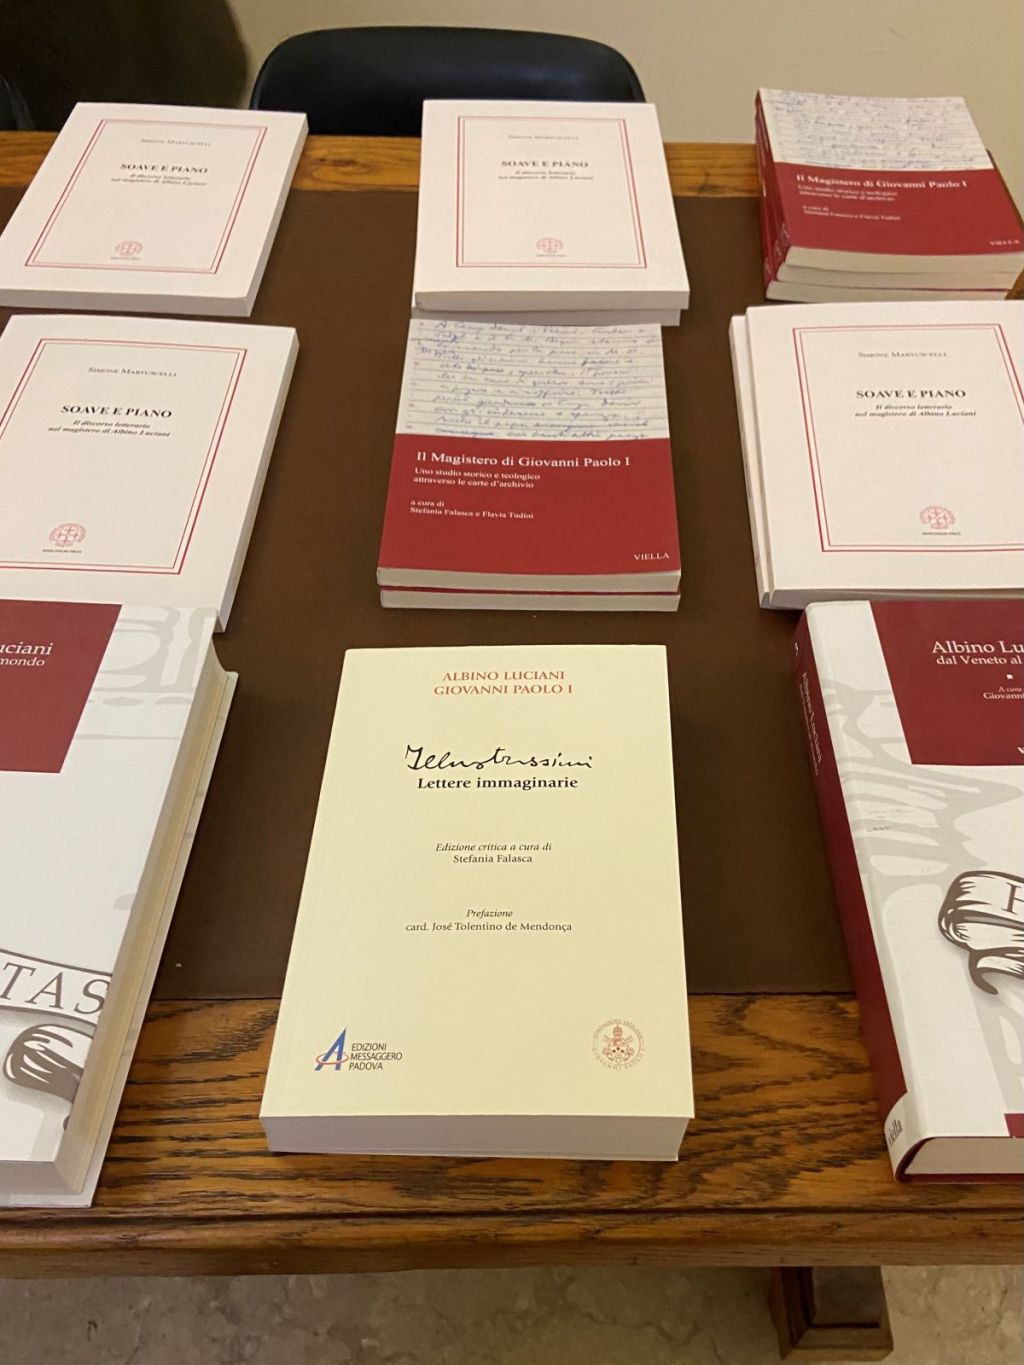 Books on John Paul I and his pontificate, including the critical editino of Illustrissimi (the Illustrious Ones) at a conference on this Pope and his library at the Pontifical Gregorian University in Rome on November 24, 2023